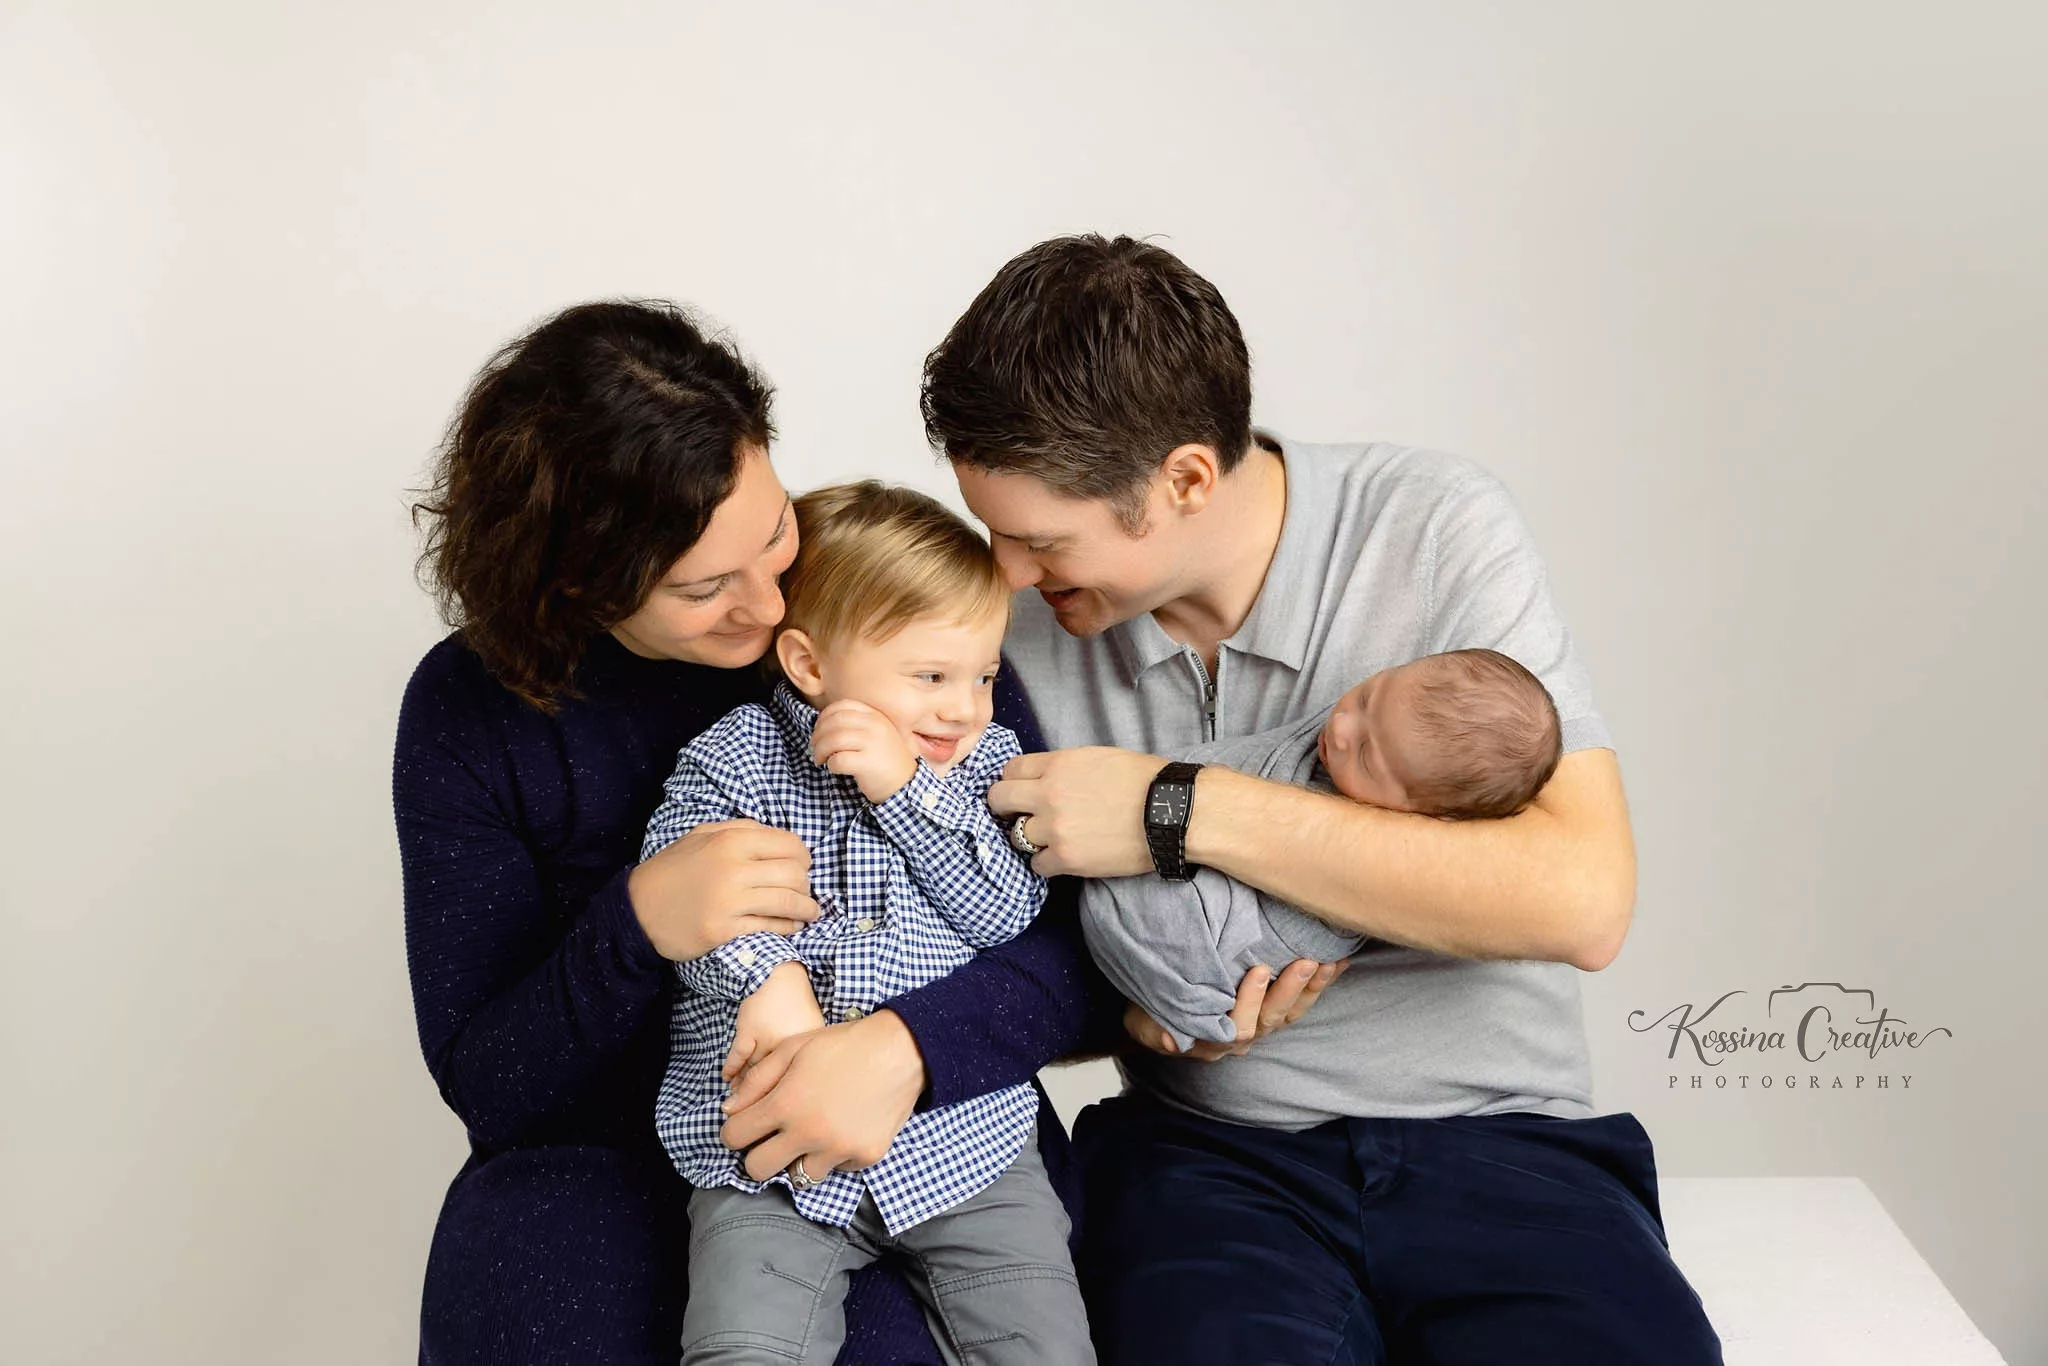 Orlando Family Newborn Photographer Baby Kid Photo studio candid family tickle fight brothers grey and navy blue